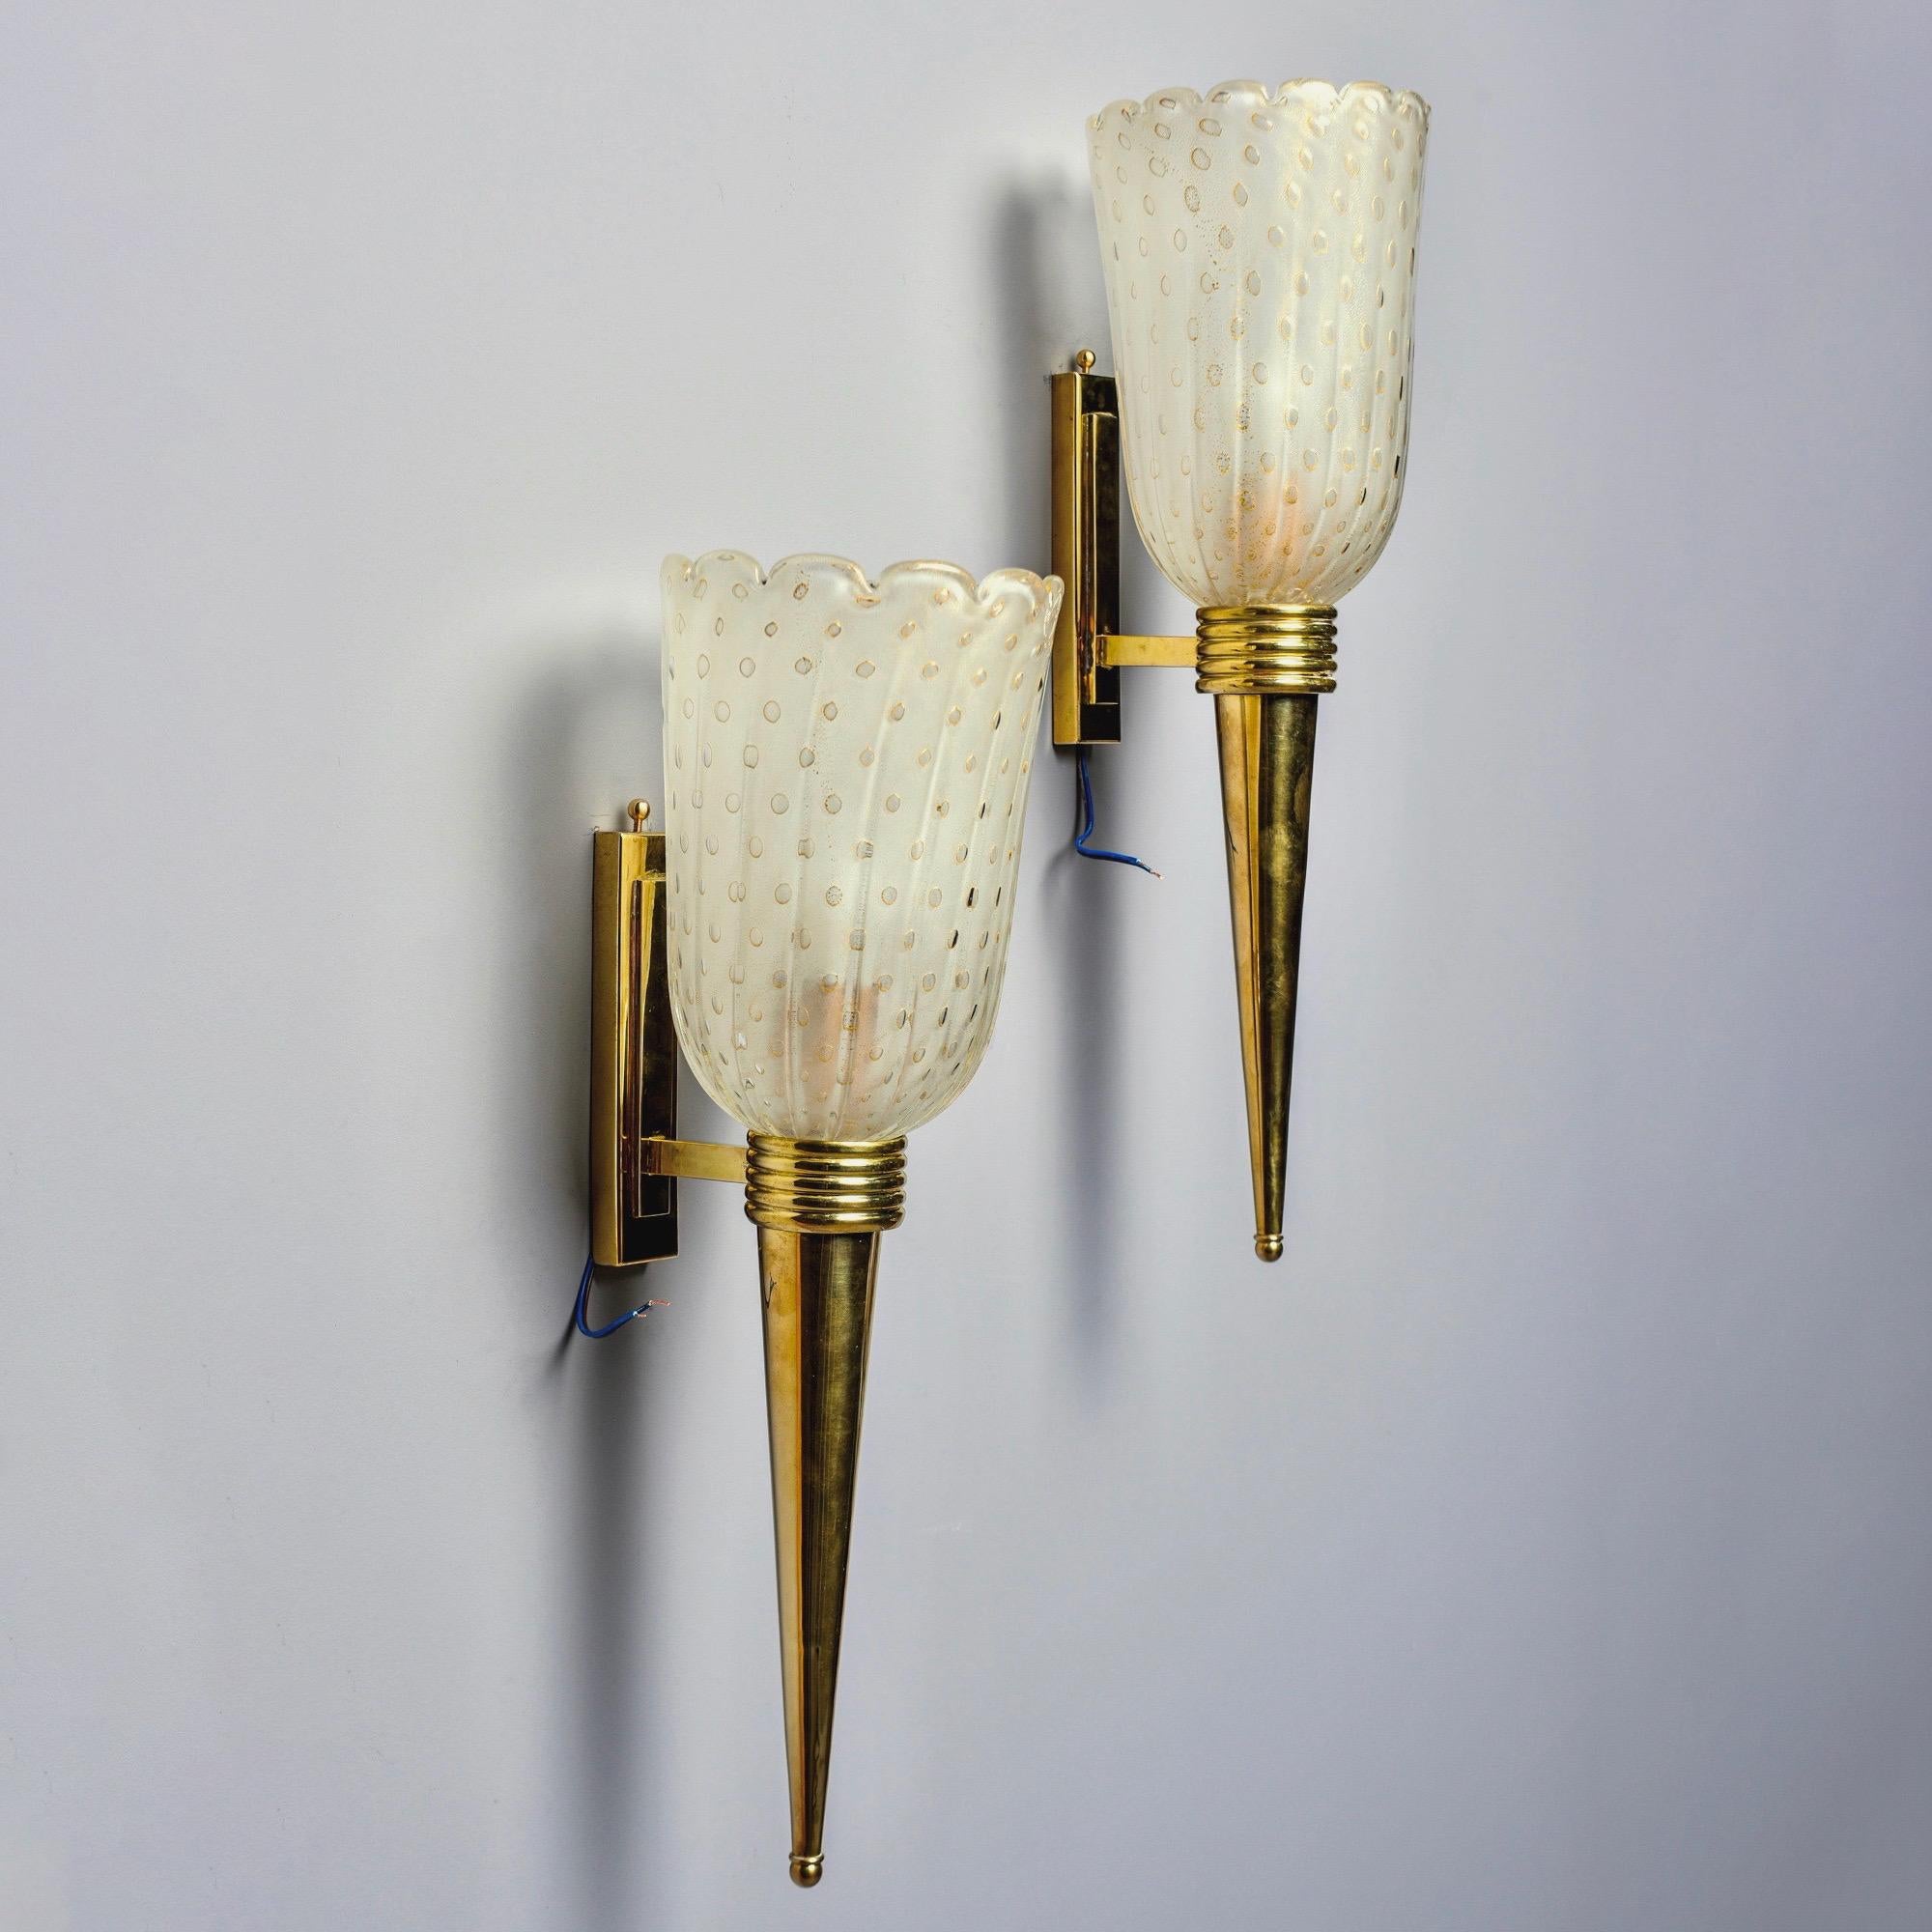 Made in Italy, this pair of torchiere style sconces feature a polished brass base and hand blown Murano glass globes with gold inclusions. Each sconce has one candelabra sized socket. Wired for US electrical standards. Sold and priced as a pair.